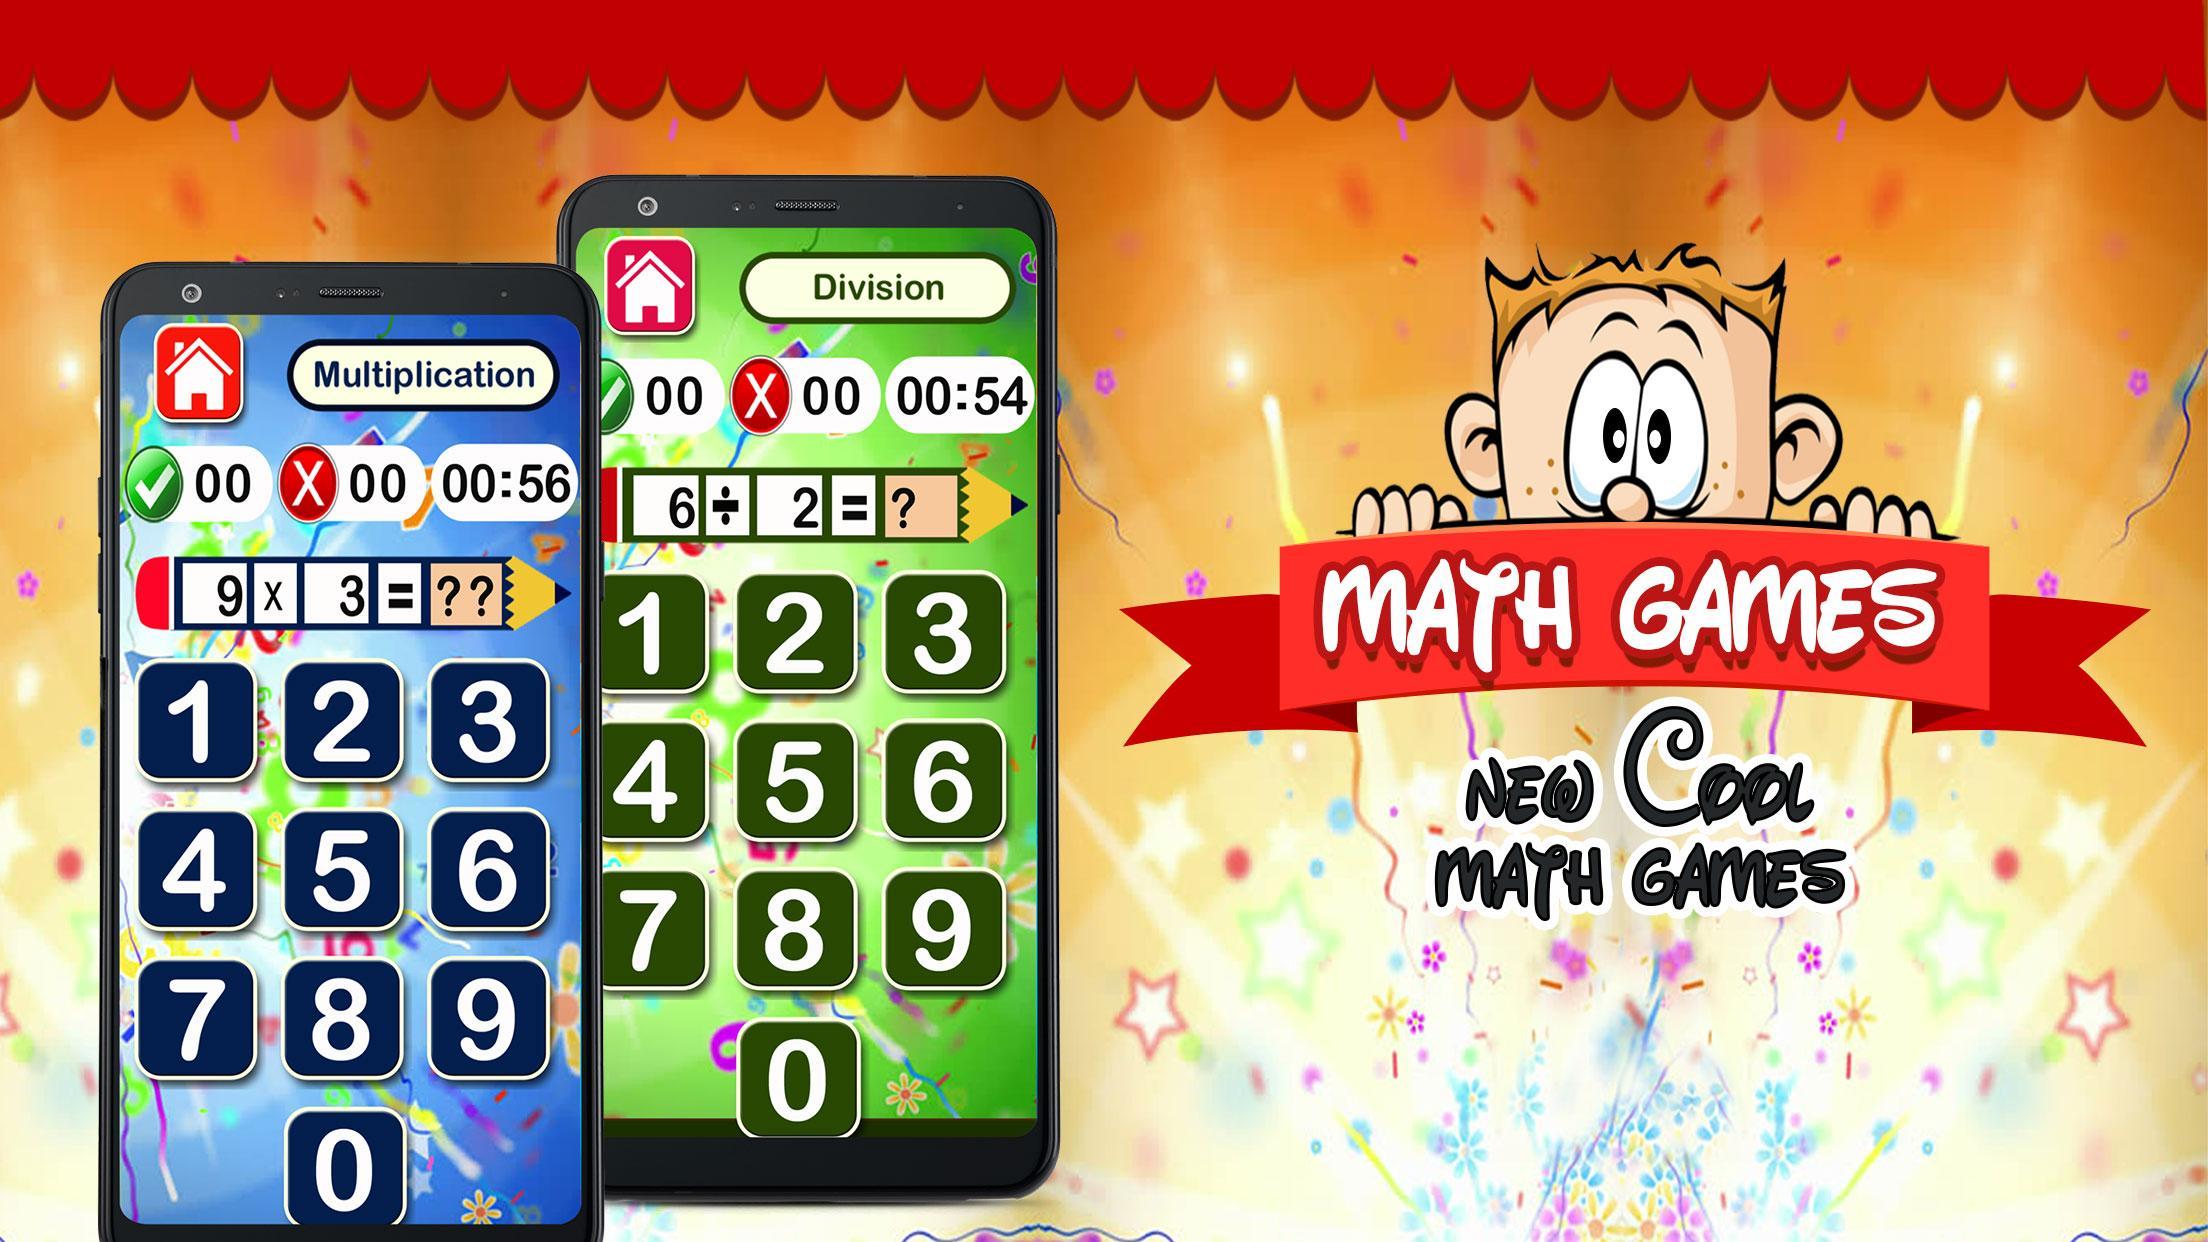 Math Games New Cool Math Games For Android Apk Download - roblox minecraft roblox cool math